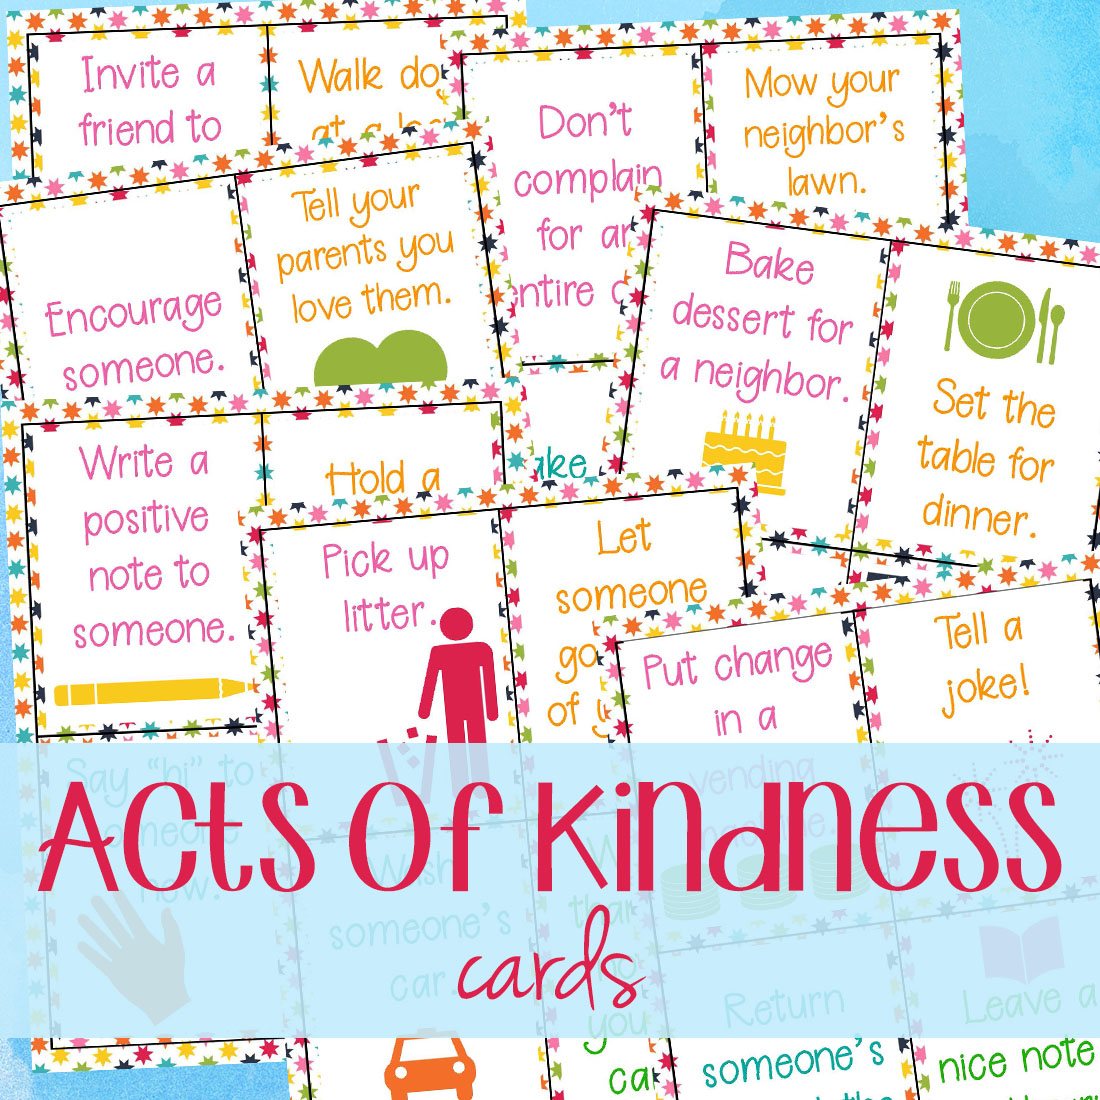 Random Acts of Kindness Calendar for November, November Kindness Calendar, show gratitude and promote kindness with these Random acts of kindness ideas for Fall, This Monthly acts of kindness calendar is full of fun ideas 